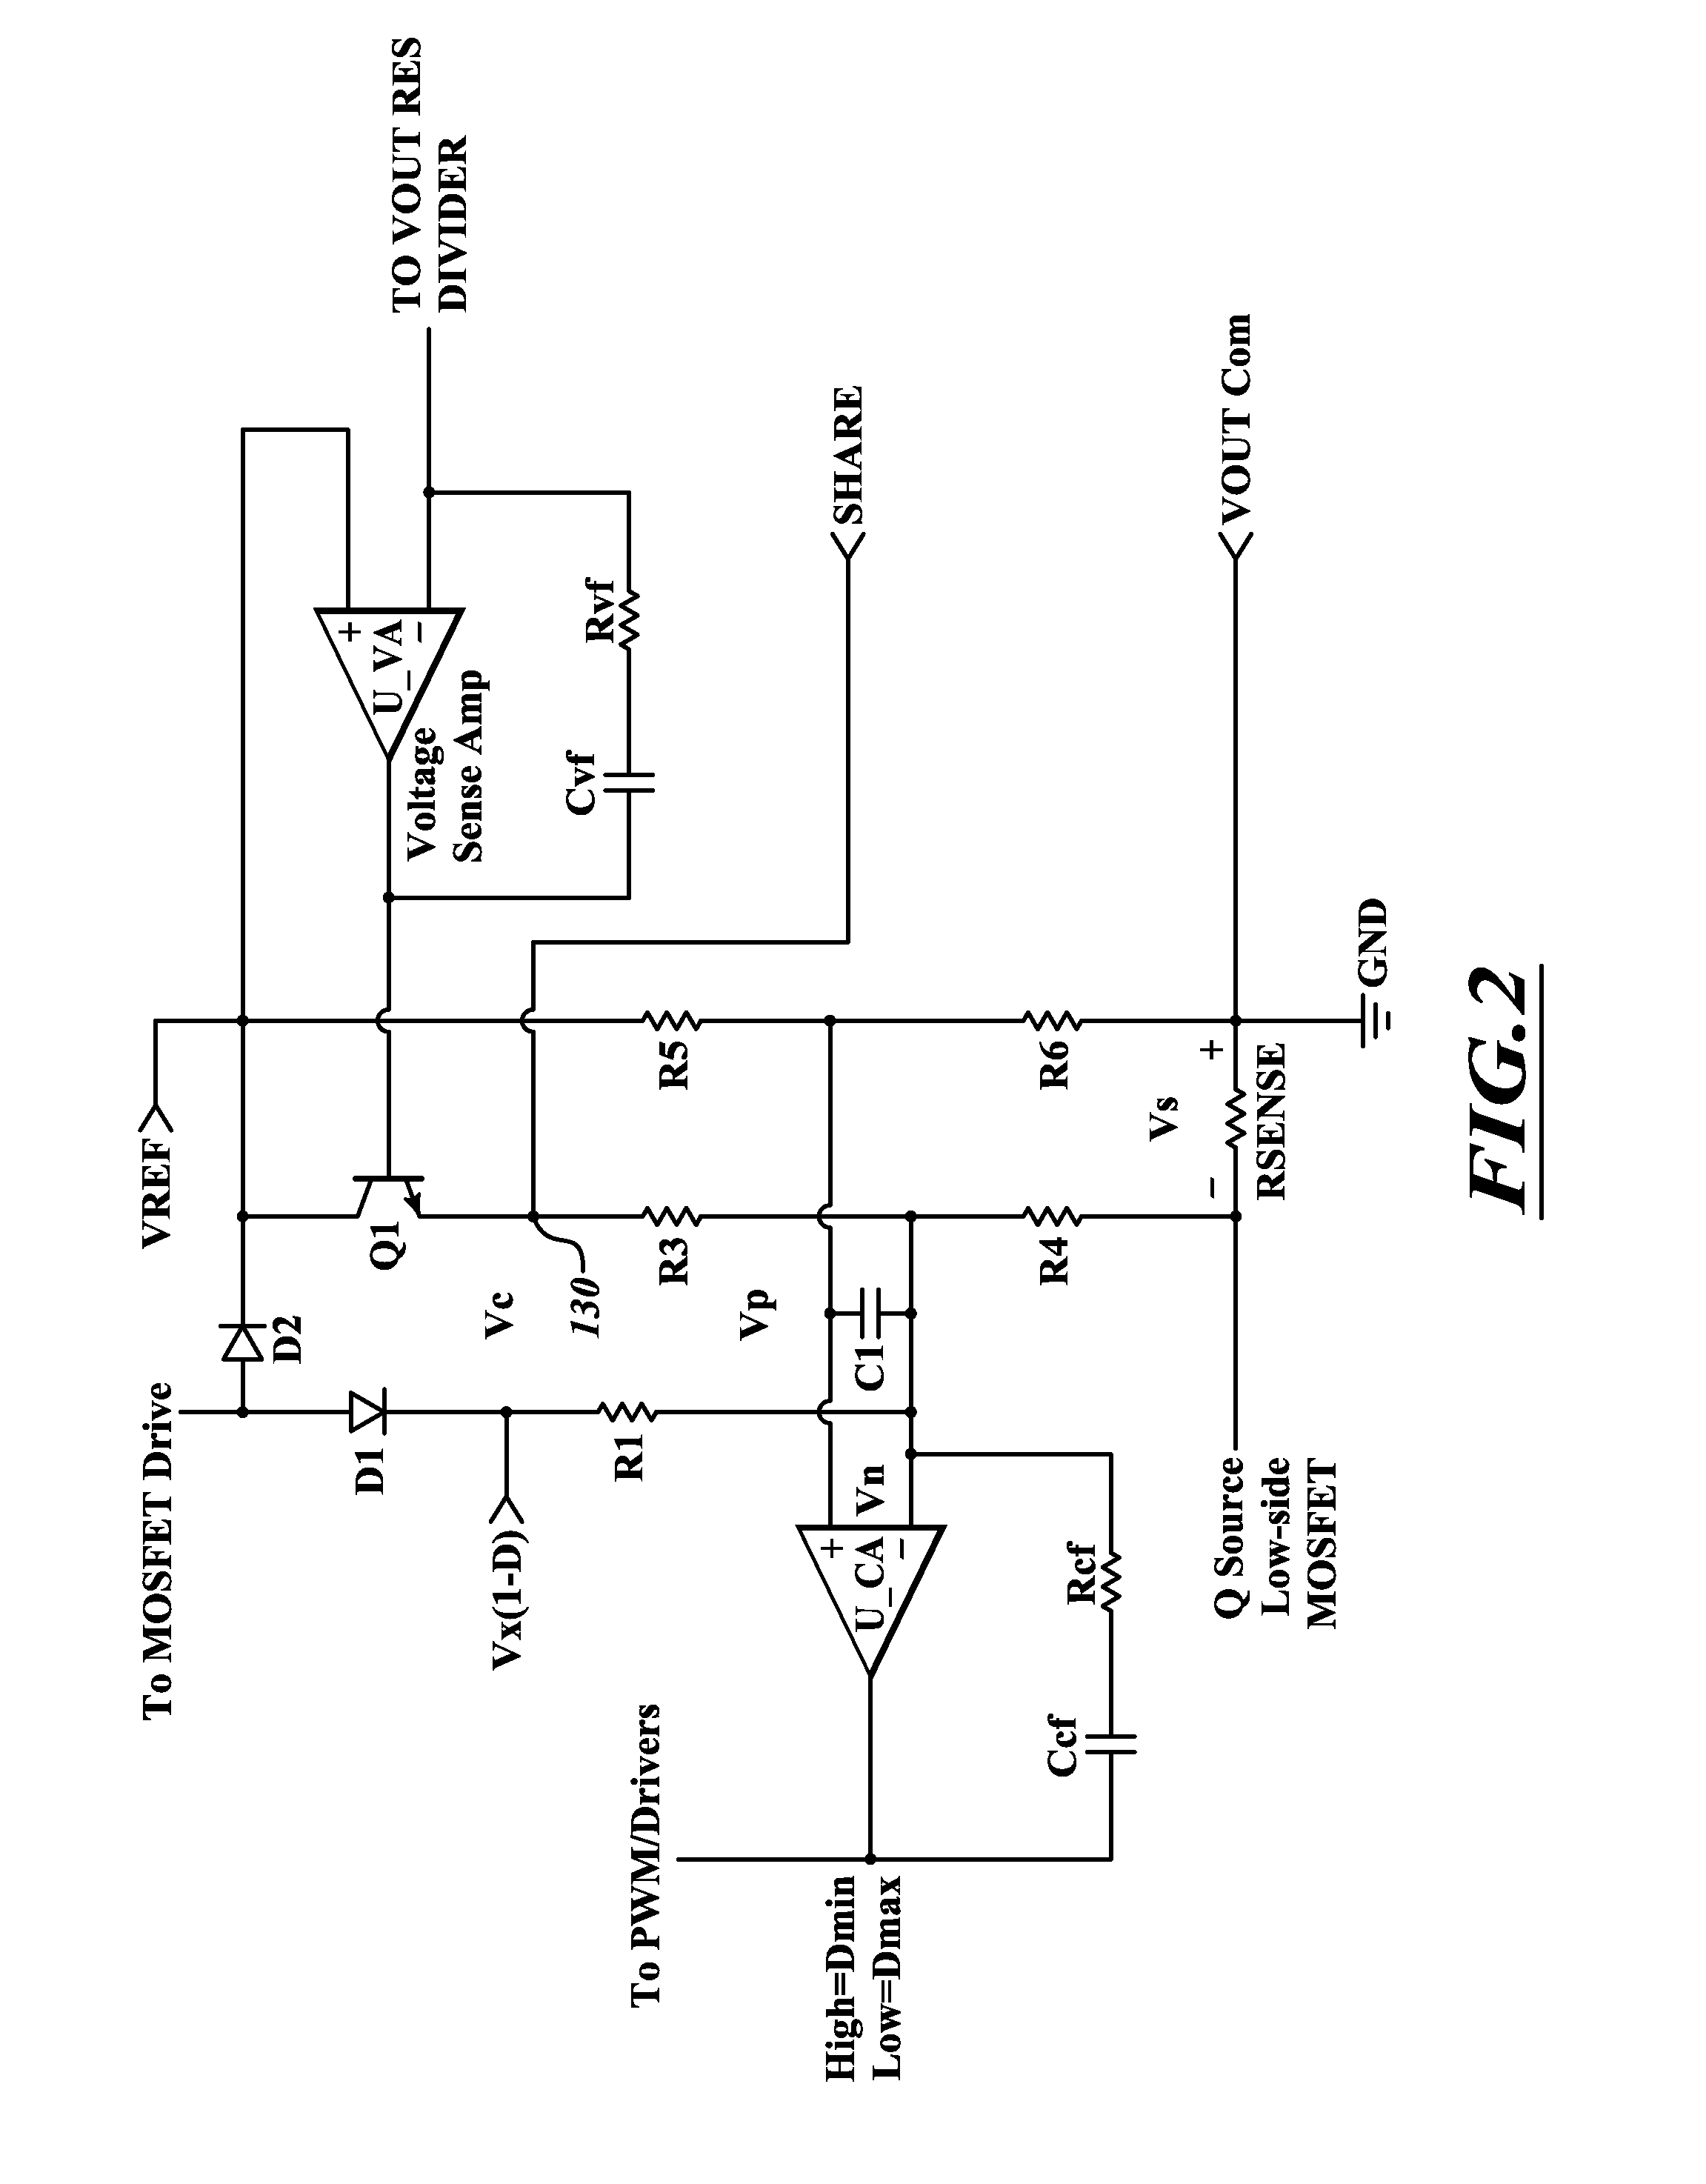 Power converter apparatus and method with compensation for current limit/current share operation